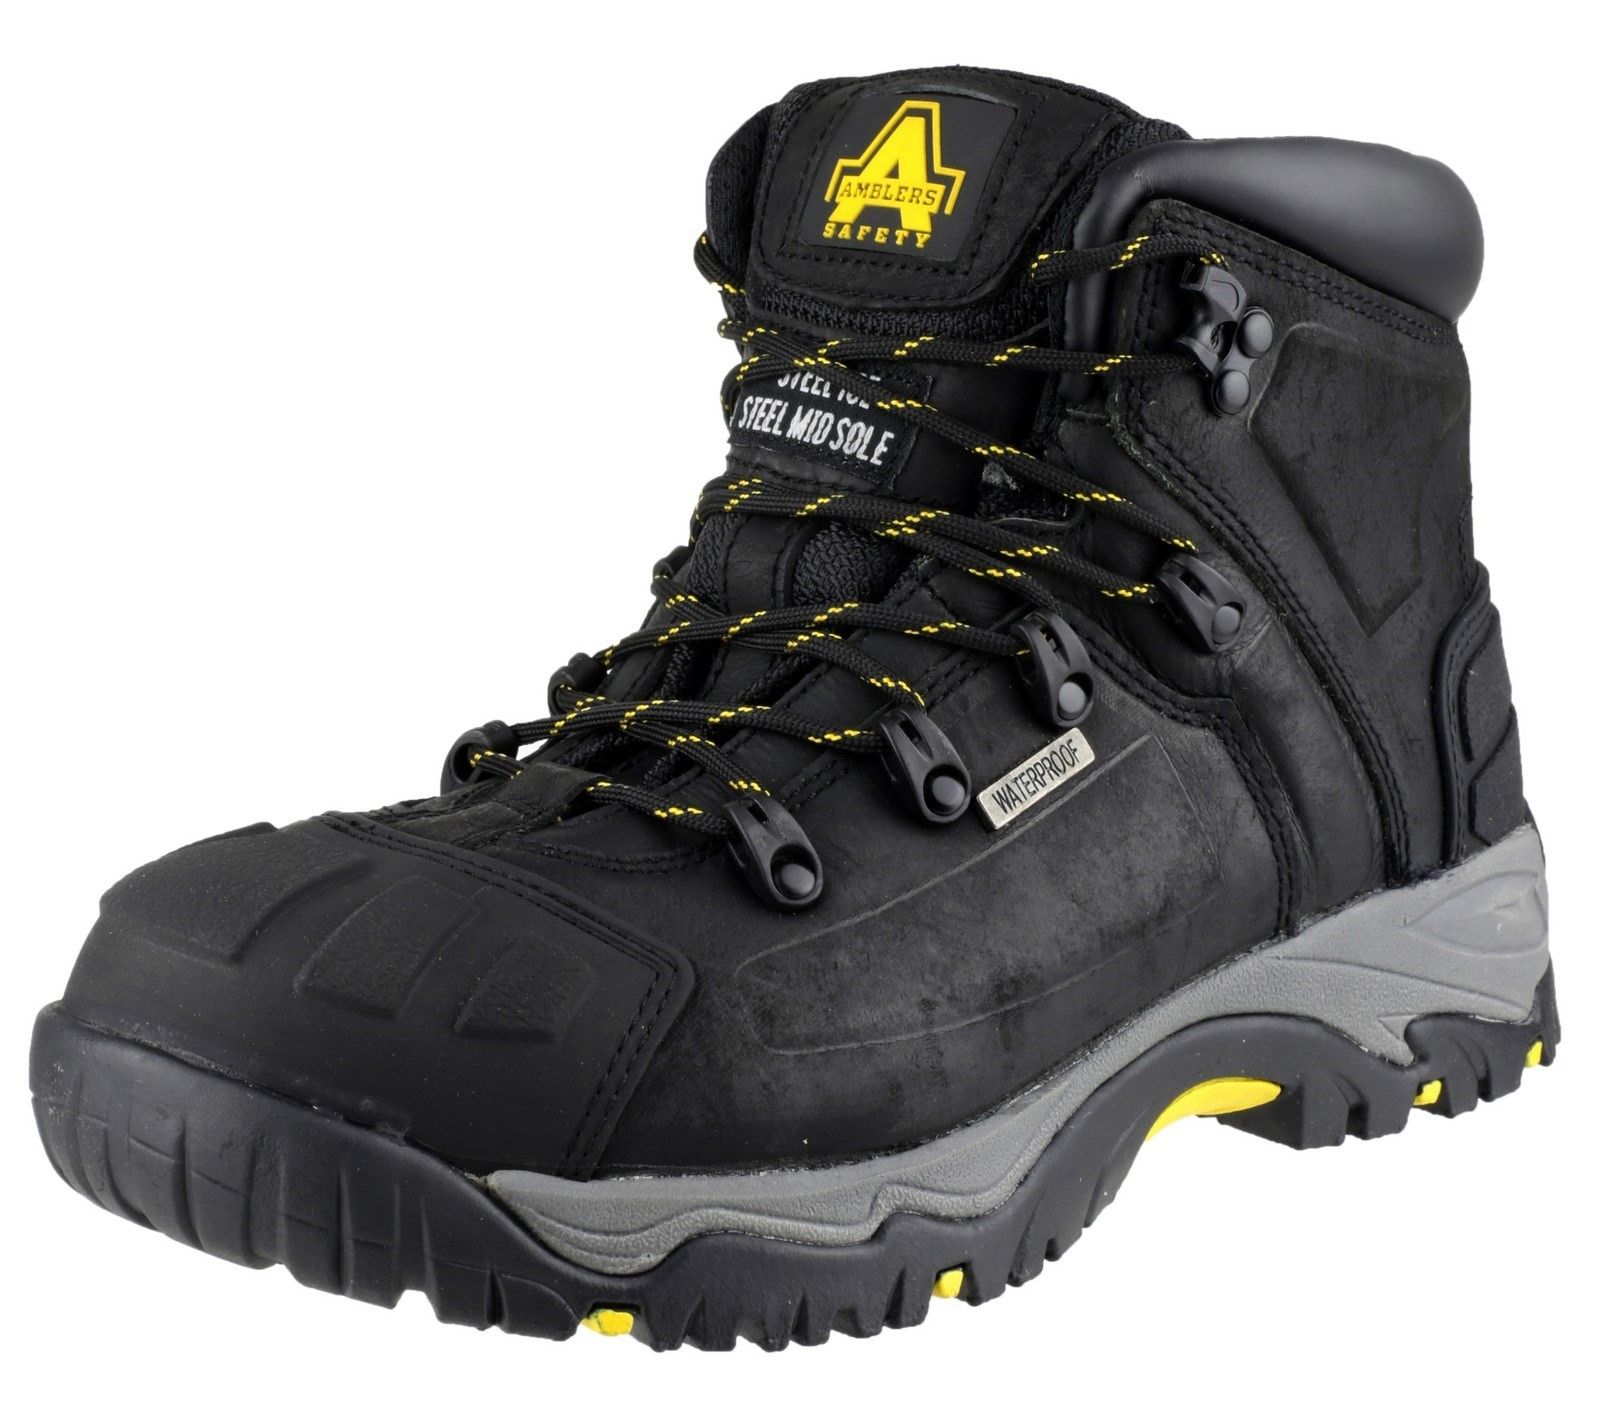 A durable, comfortable safety boot with inbuilt waterproof breathable membrane lining, antistatic, penetration protection and 300 degree heat resistant outsole.Water resistant crazy horse leather upper. 
Breathable internal waterproof membrane. 
Moulded rubber toe and heel guard. 
PU padded collar. 
Steel toe and steel midsole.